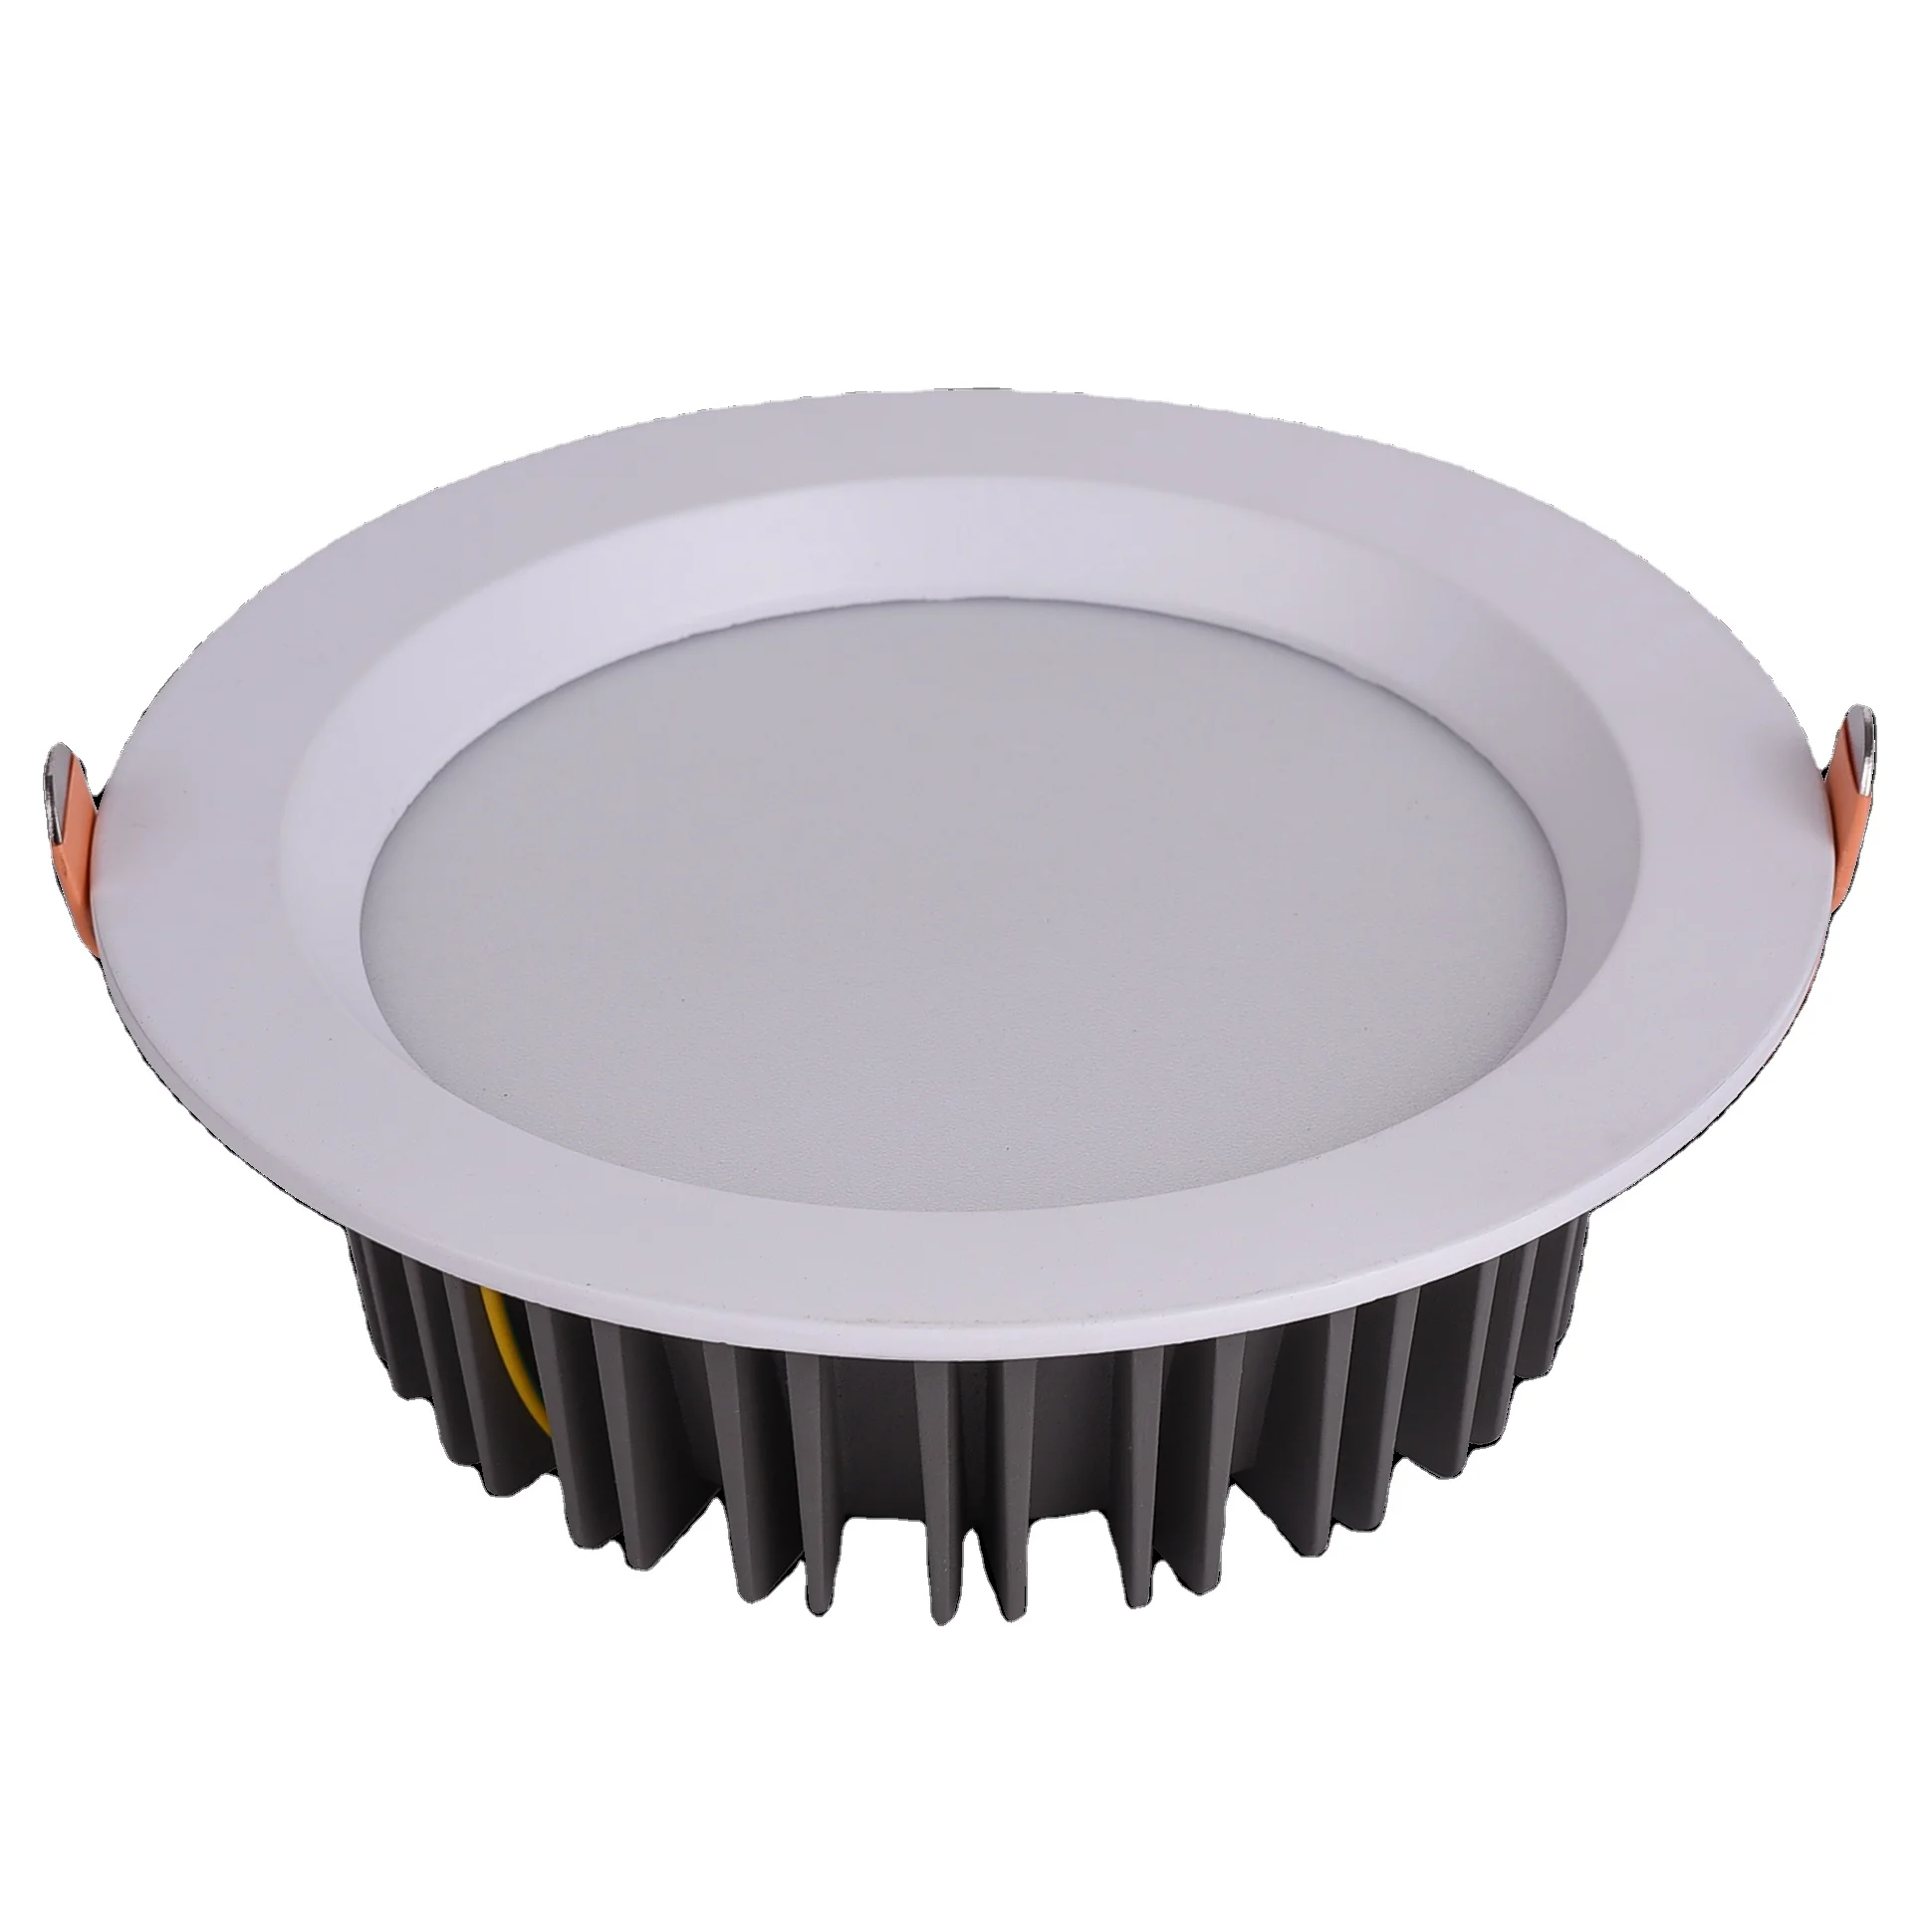 Die-Casting Aluminum 7w -50w COB SMD Led Downlight Down Light With Best Price